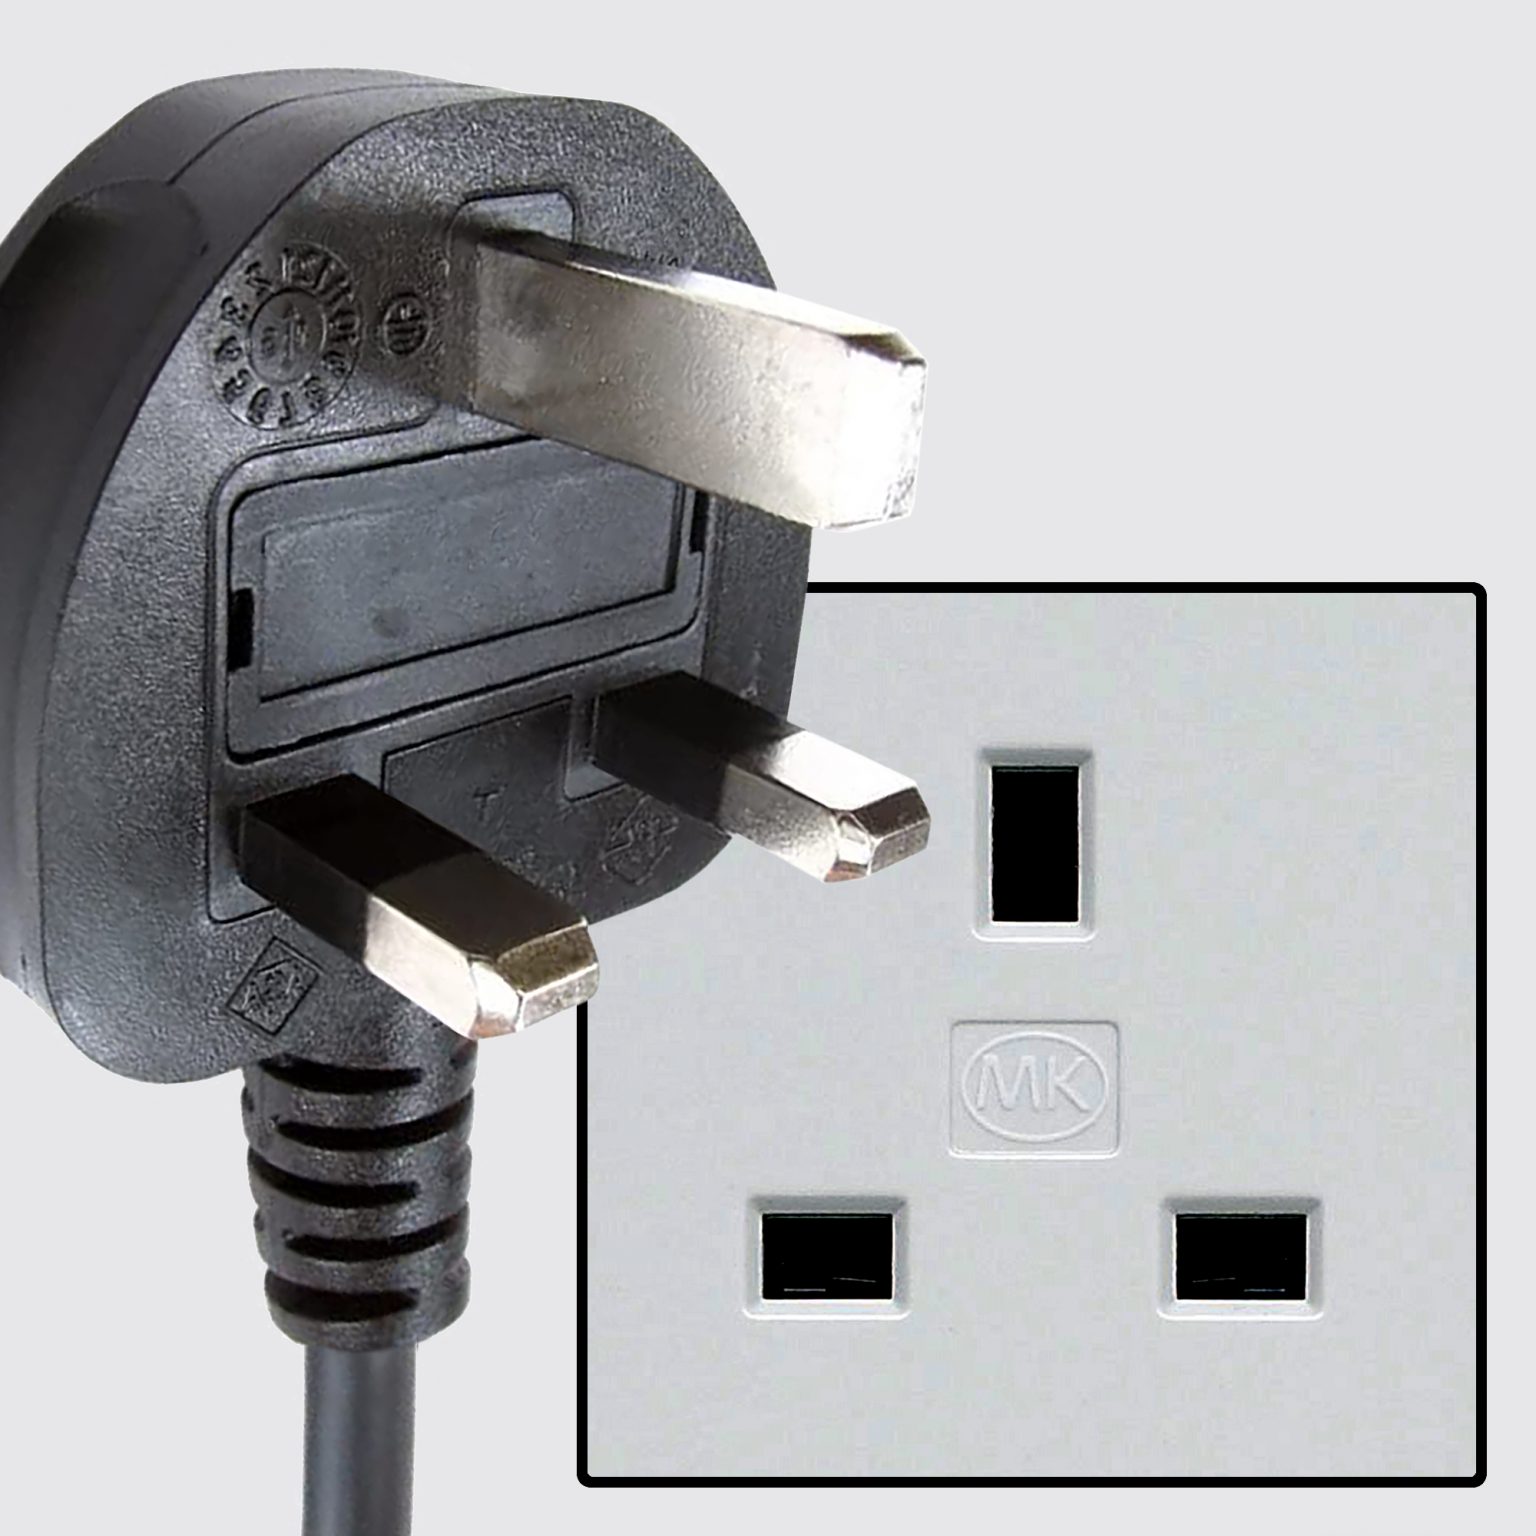 Travel Plug Adapters in Southeast Asia